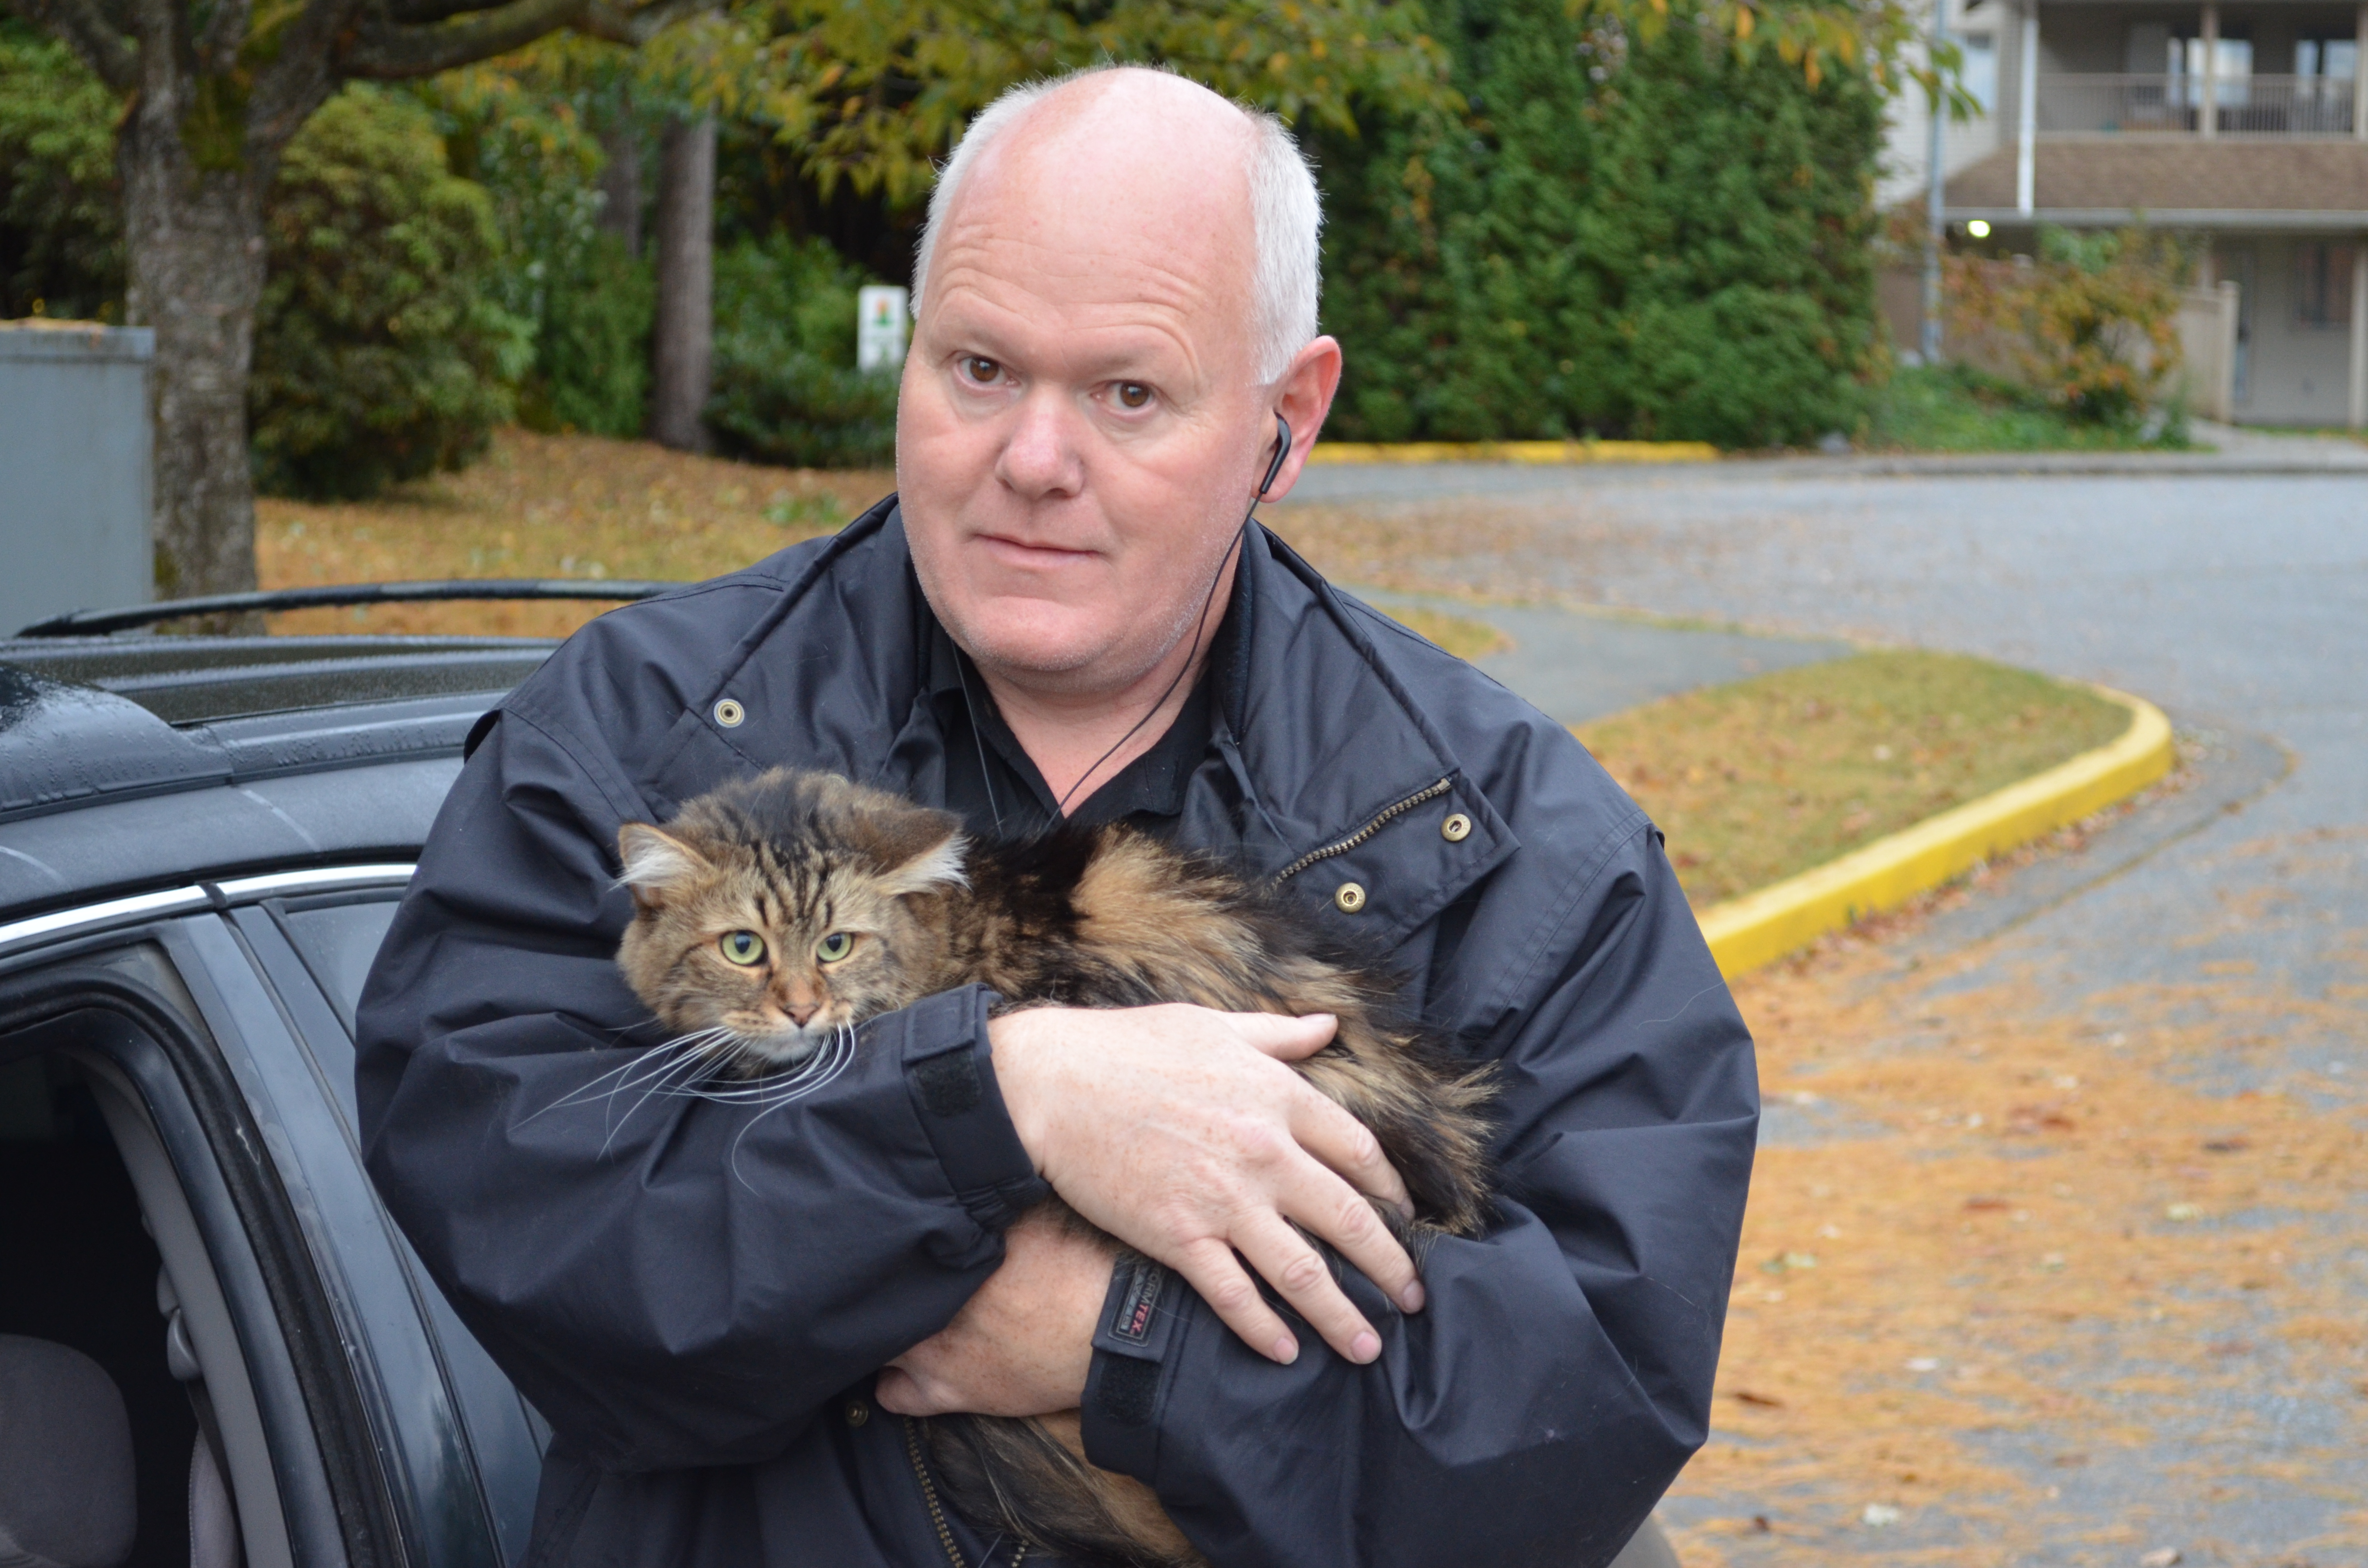 Mr. Locksmith Pets - Randy and his Cat "Pixie"